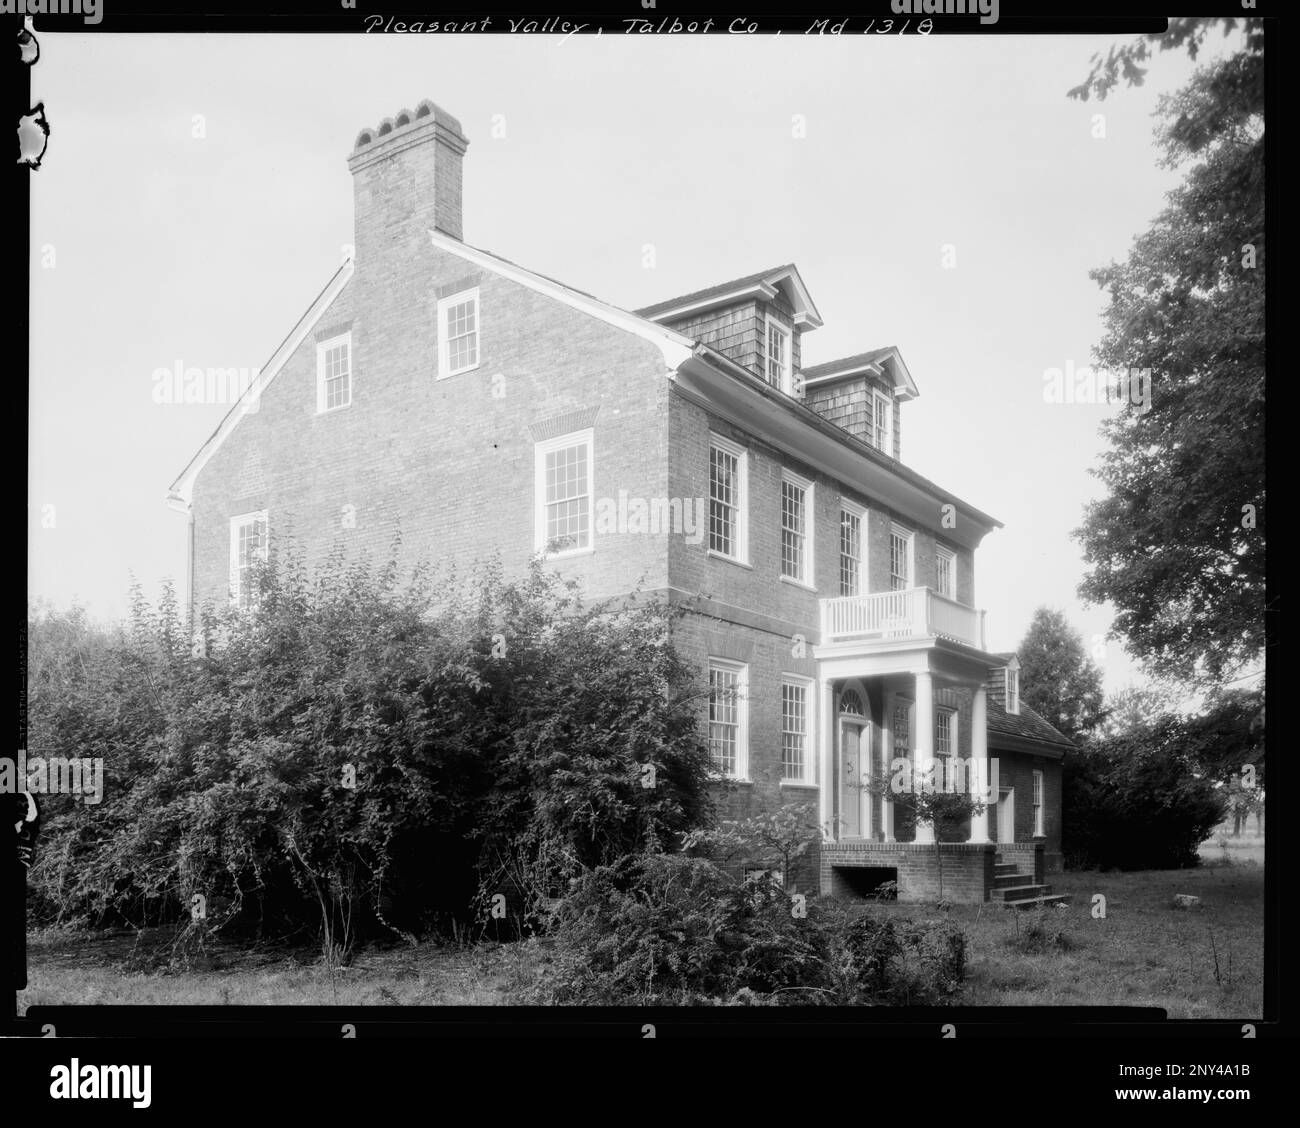 Pleasant Valley, Easton, Talbot County, Maryland. Carnegie Survey of the Architecture of the South. United States, Maryland, Talbot County, Easton,  Brickwork,  Dormers,  Houses,  Porches. Stock Photo